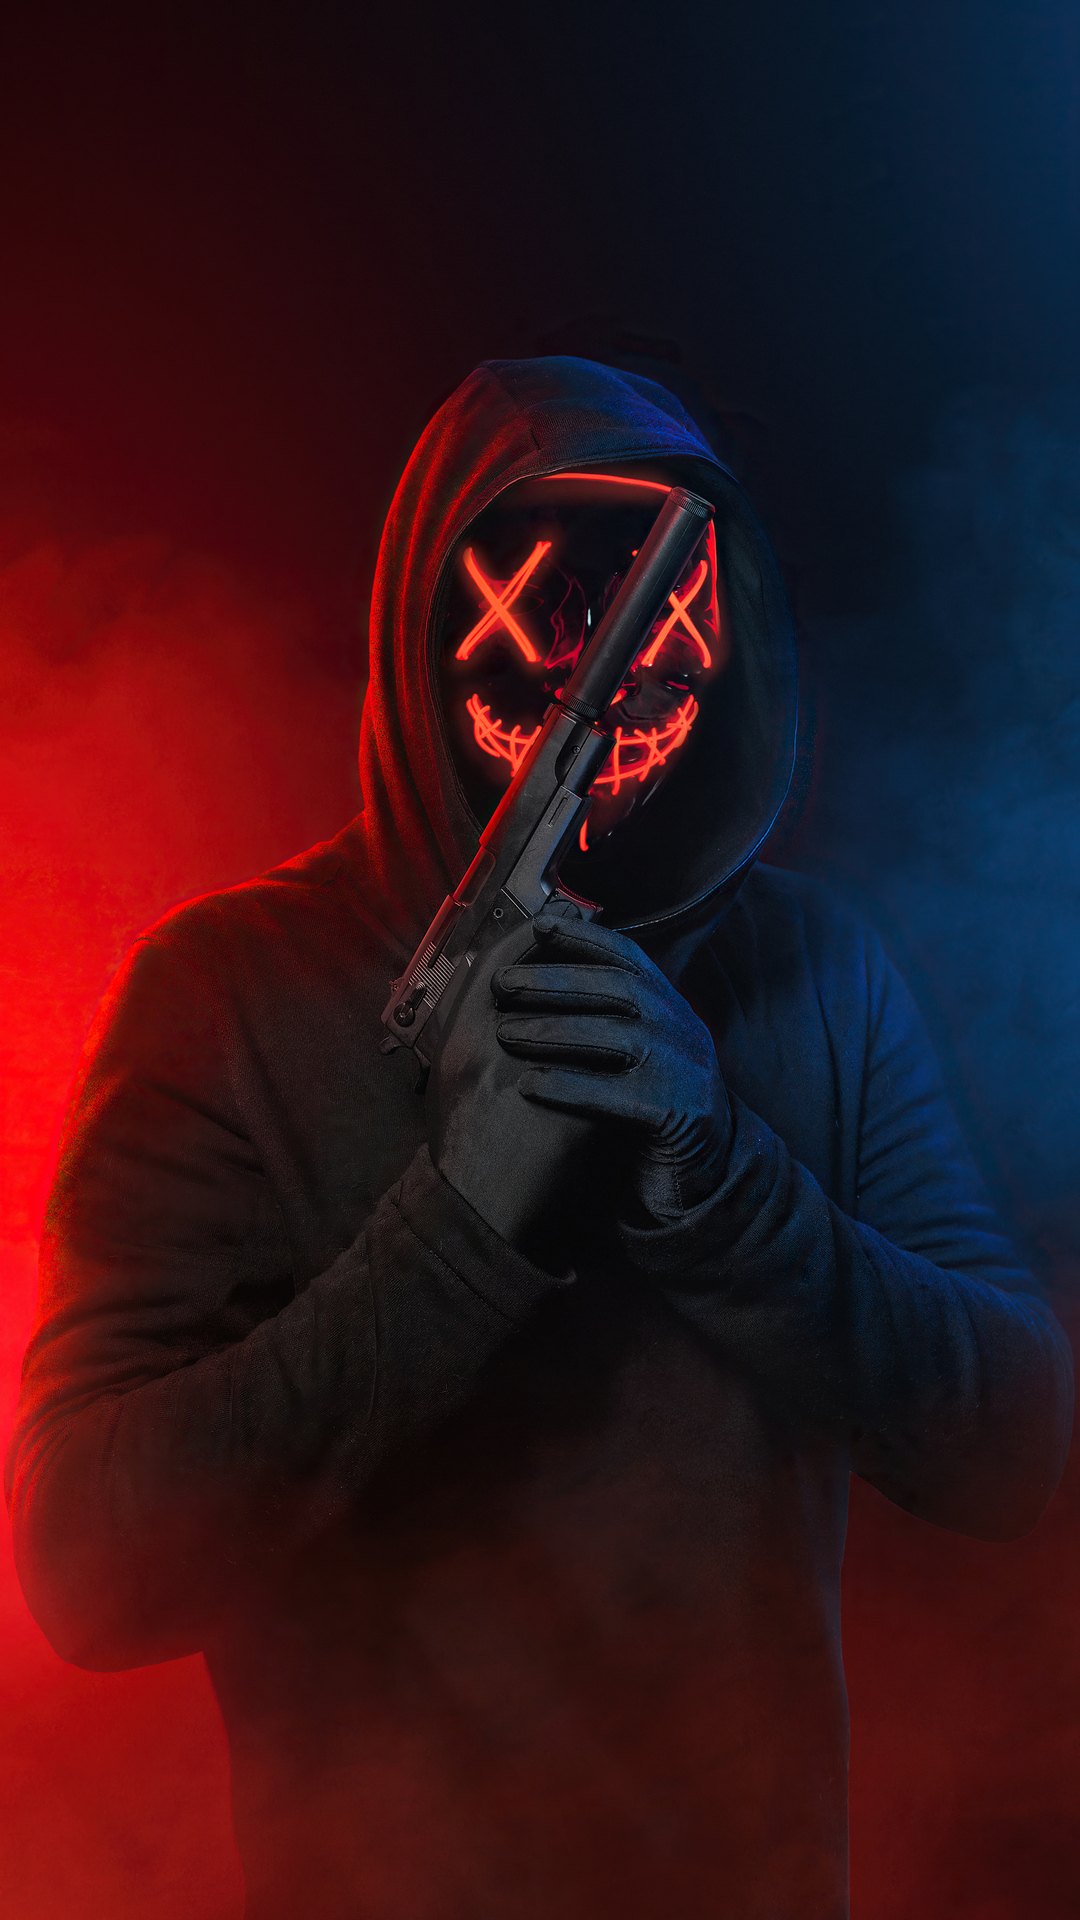 Neon mask guy with gunK wallpaper, free and easy to download